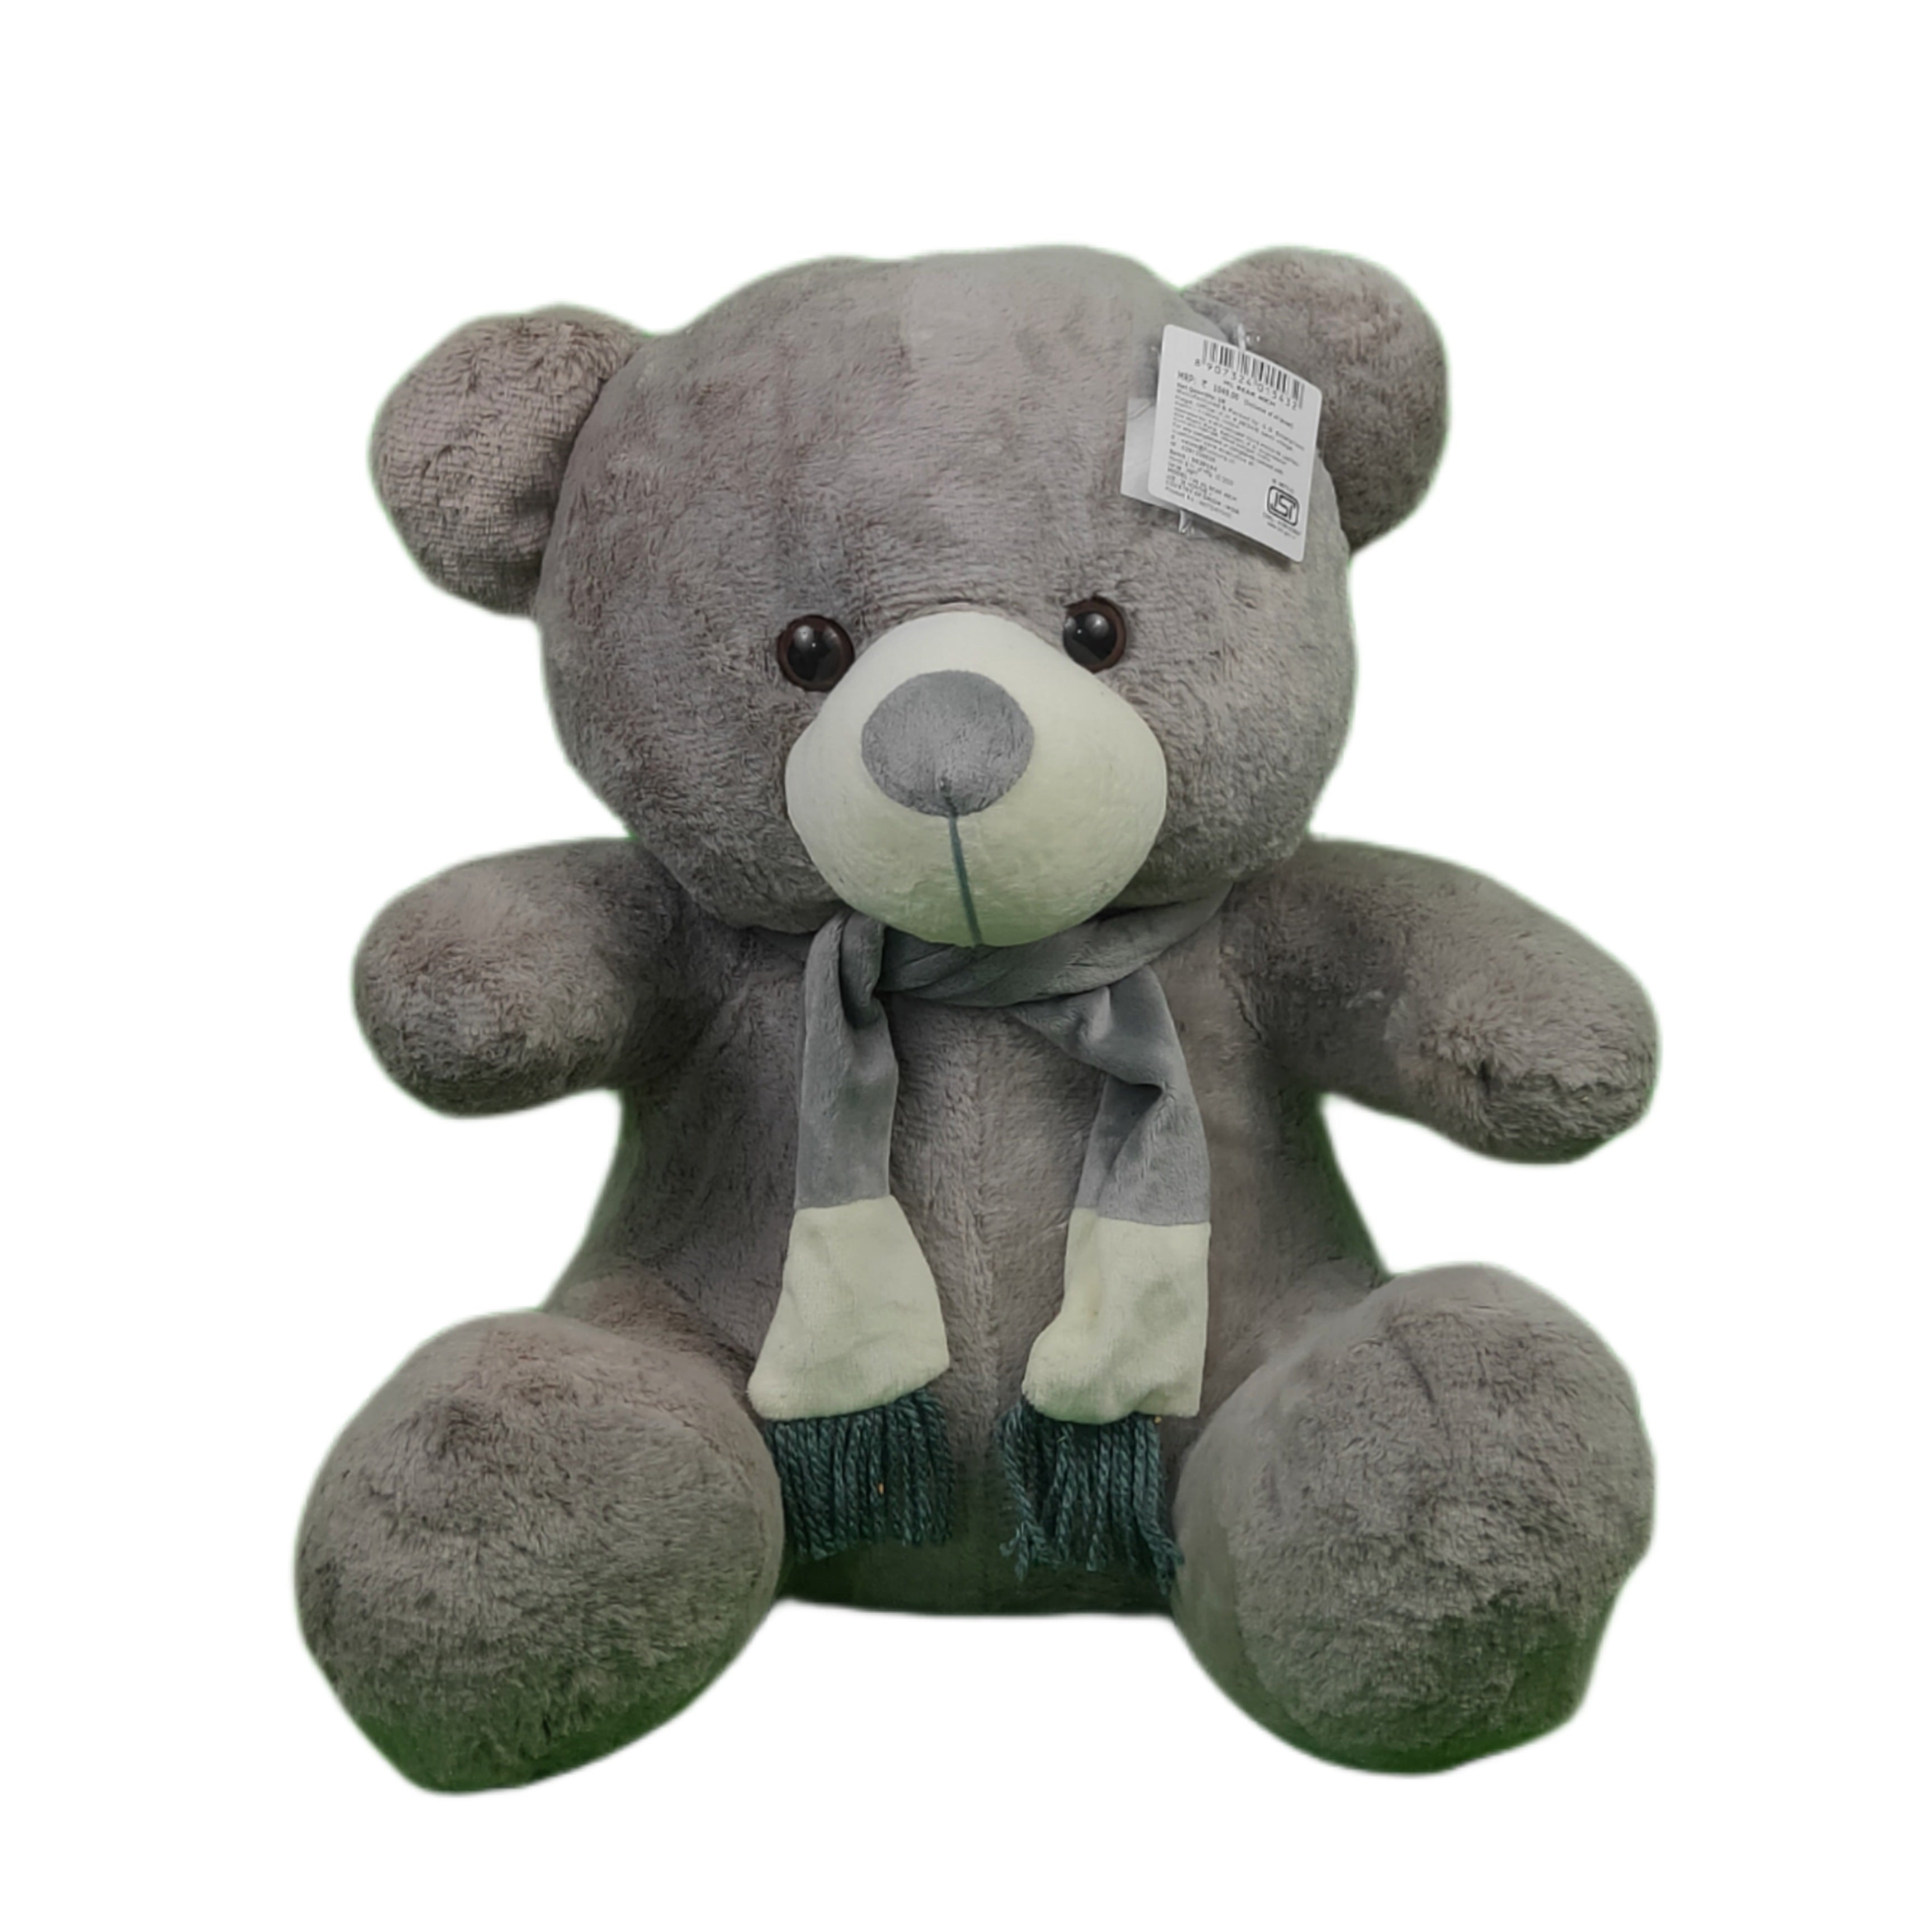 Play Hour Teddy Bear Plush Soft Toy with Muffler for Ages 3 Years and Up - Grey, 40cm